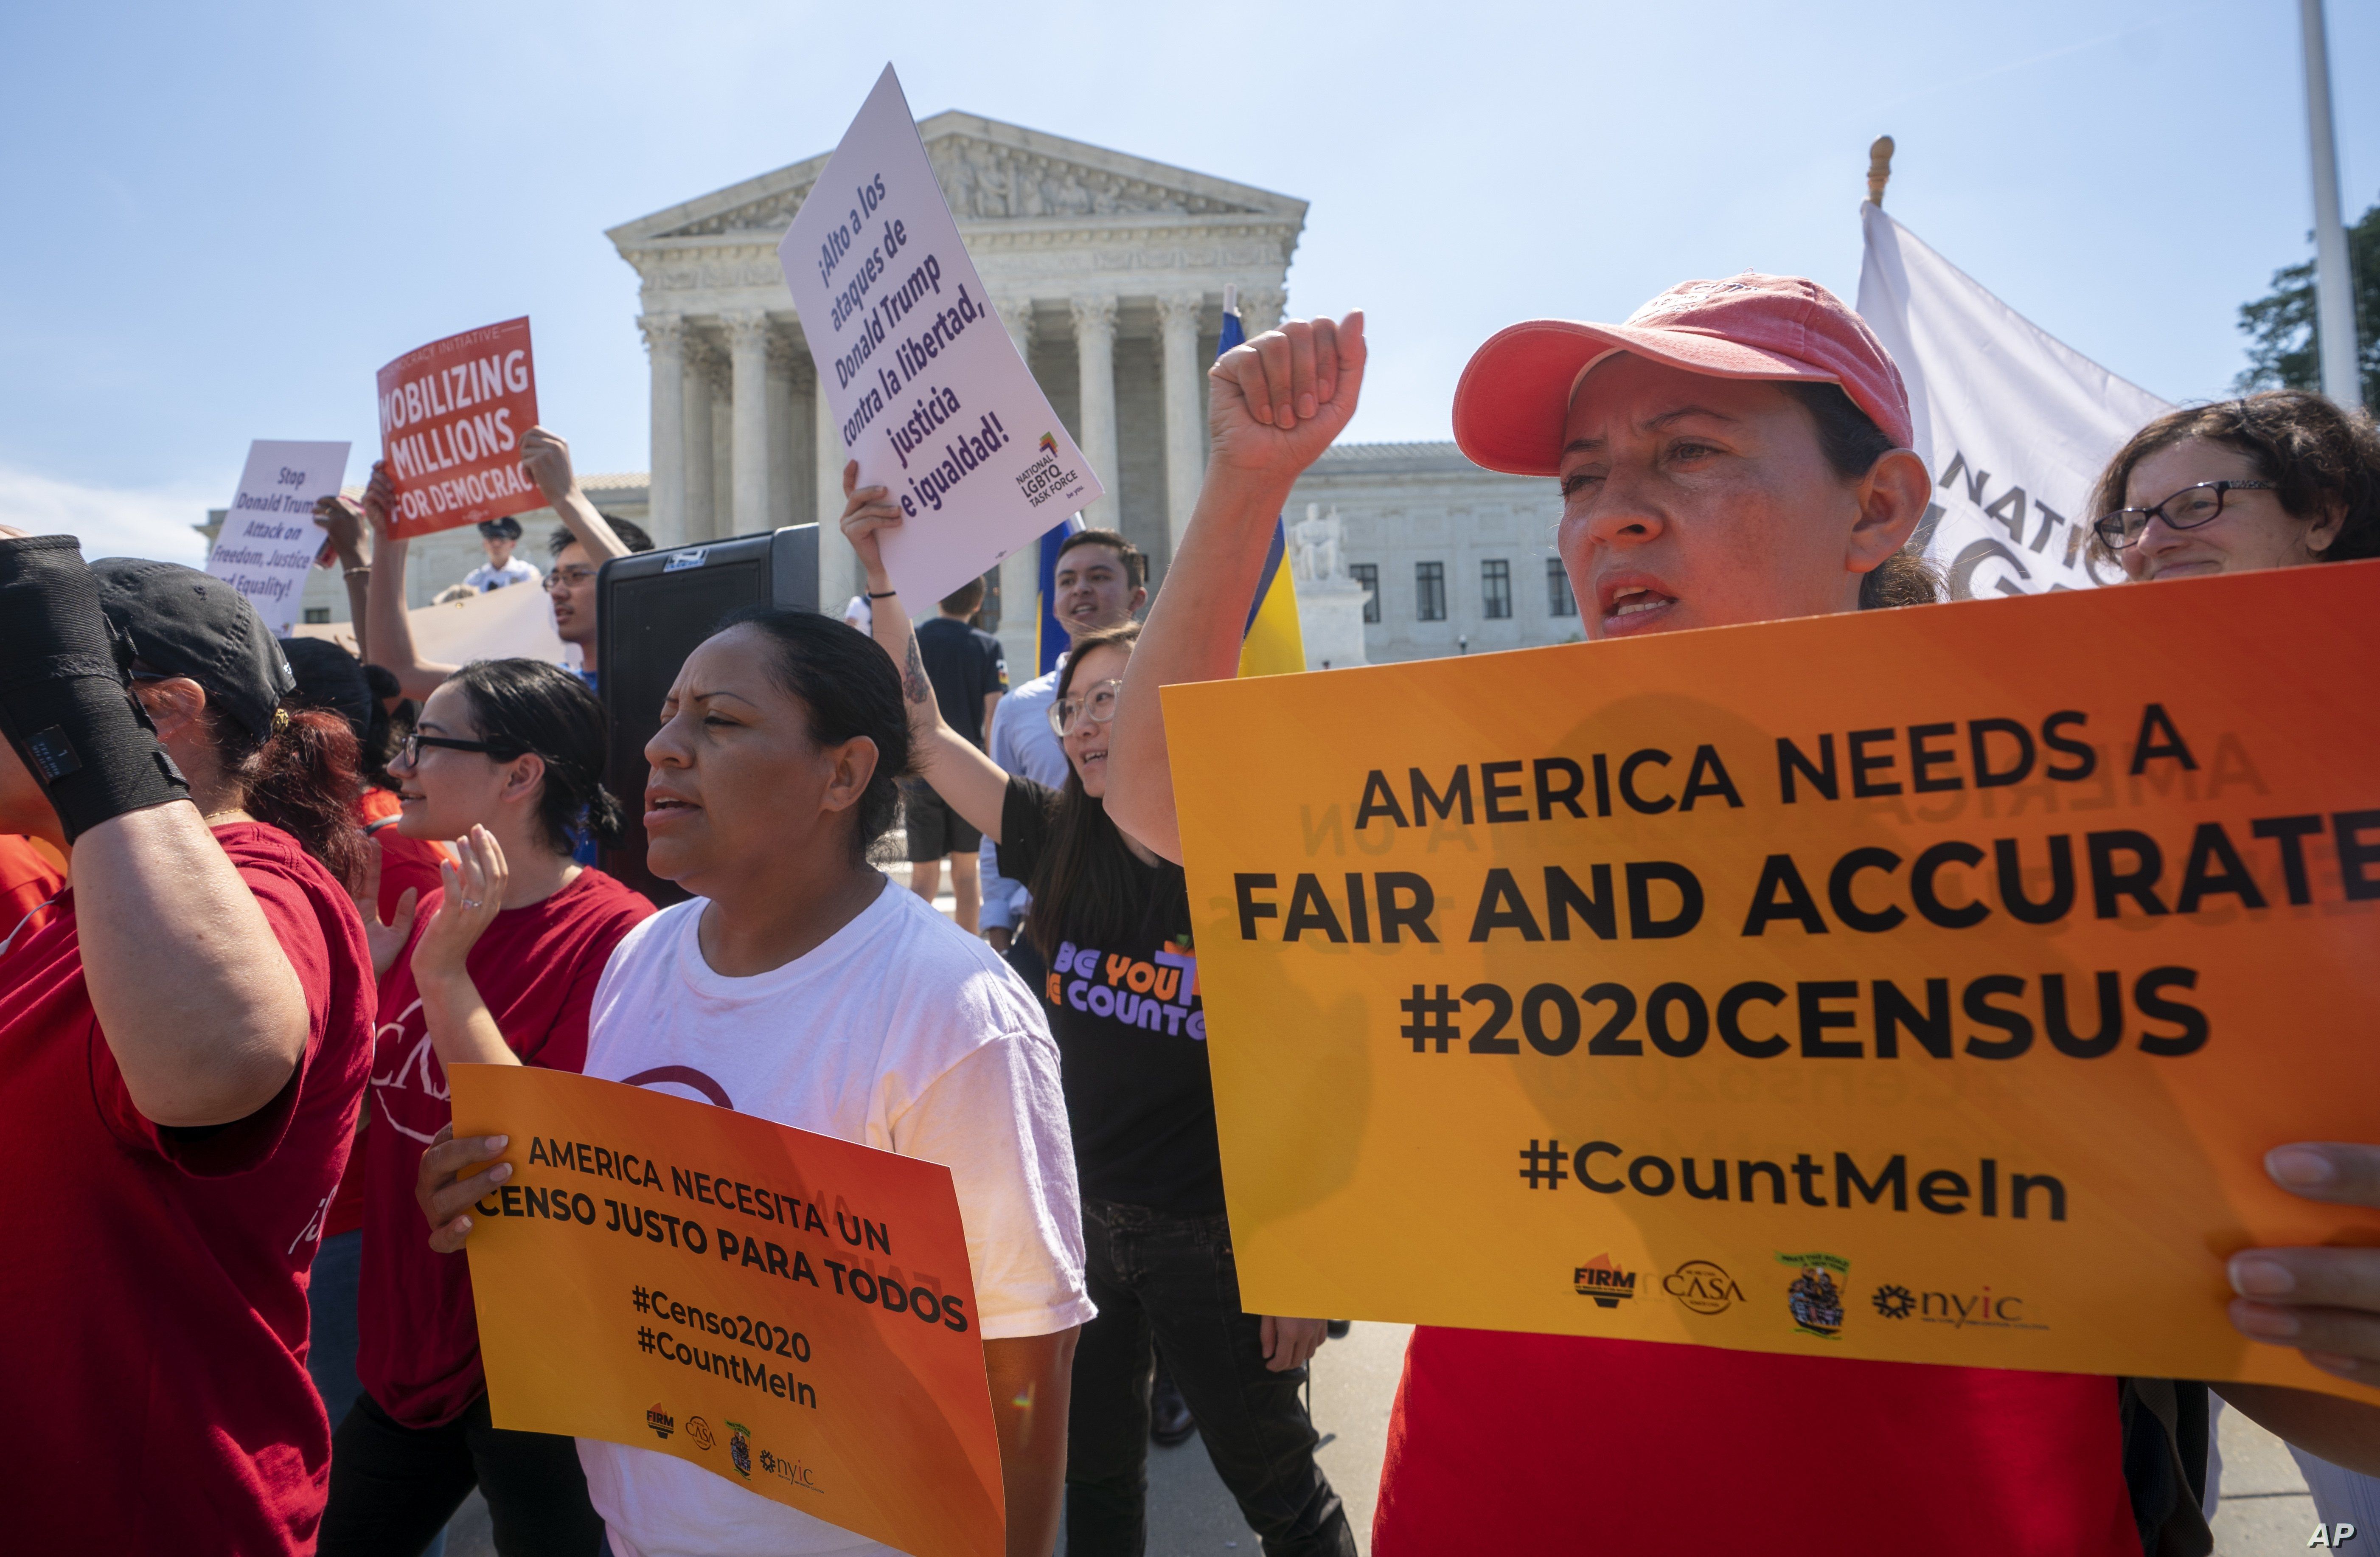 Demonstrators are seen at the Supreme Court as justices deliberate on a census case involving an attempt by the Trump administration to include a citizenship question in the 2020 census, on Capitol Hill in Washington, June 27, 2019.